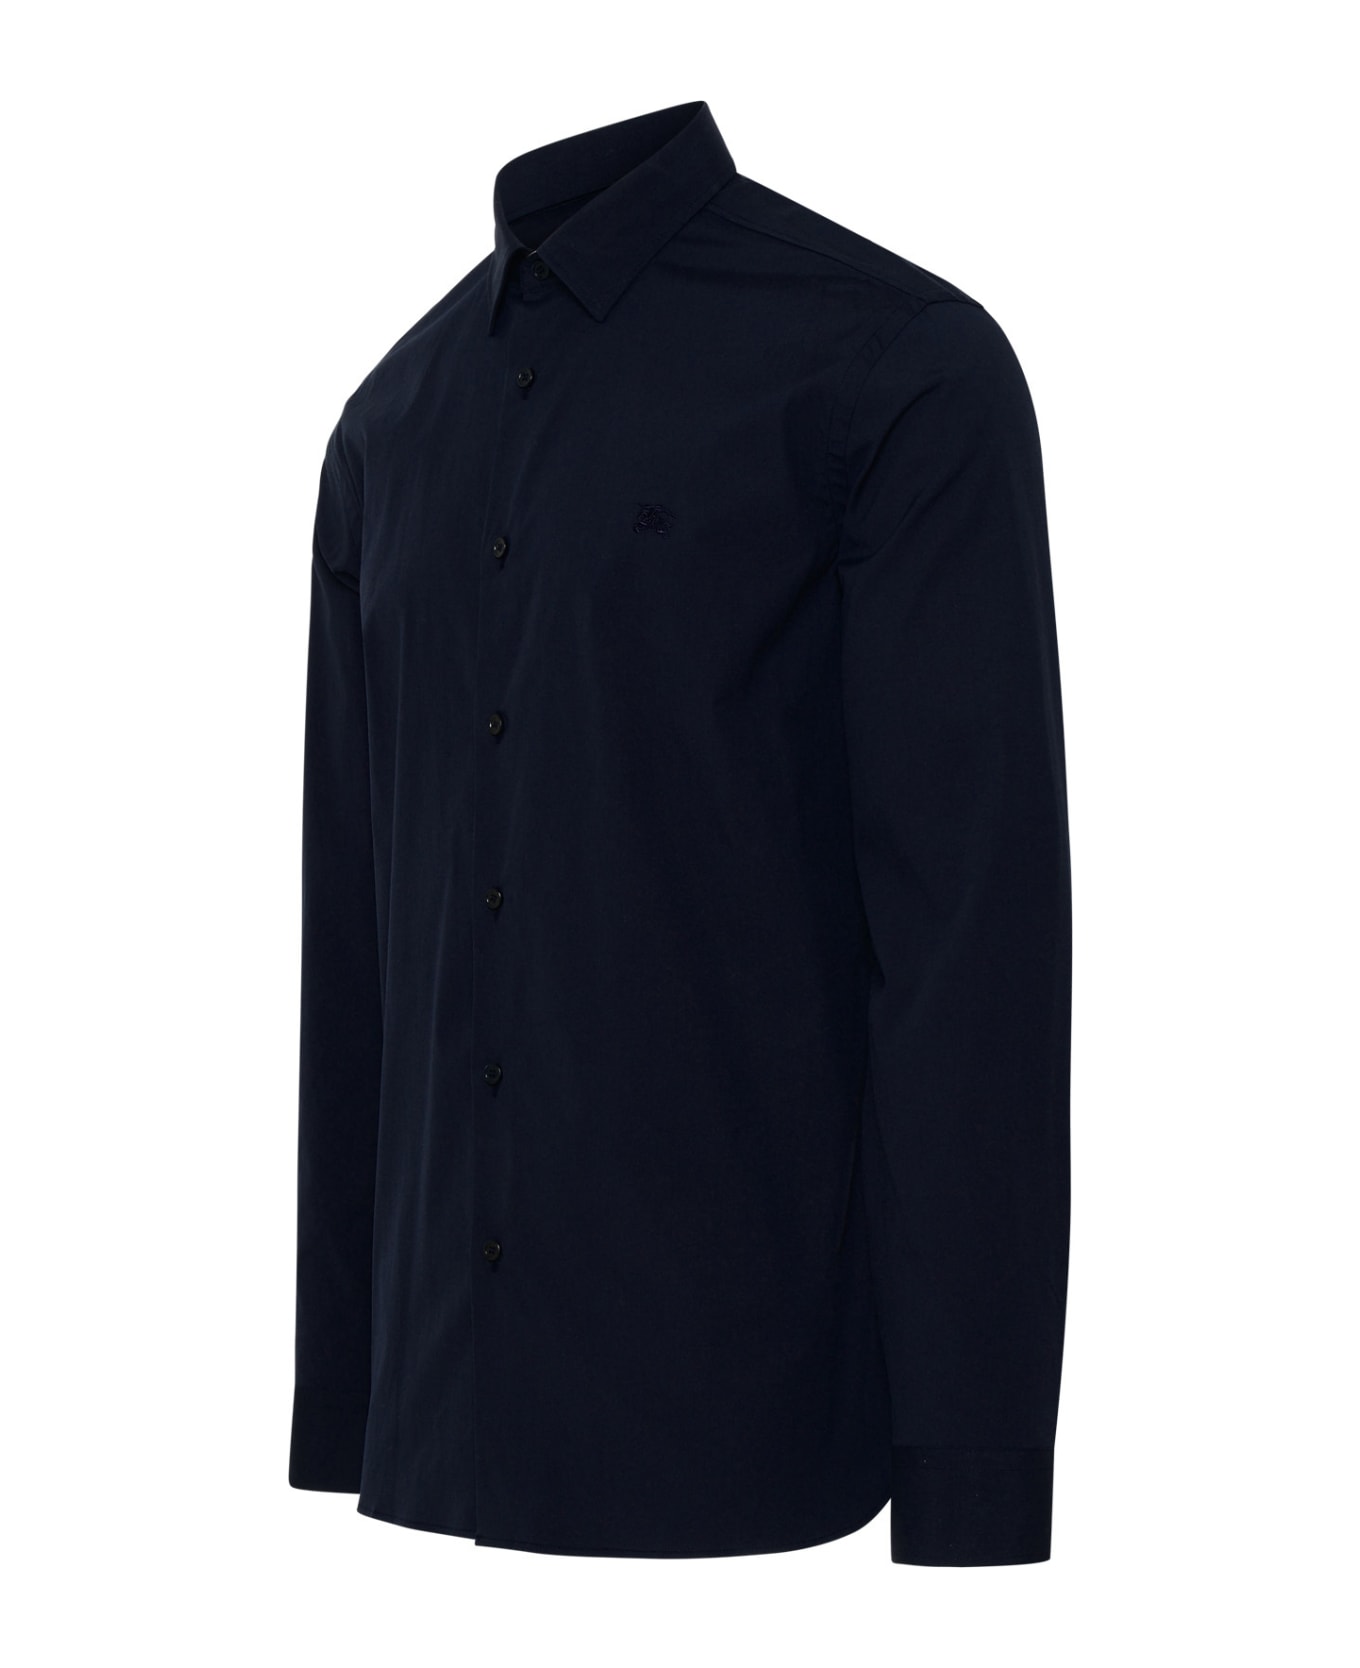 Burberry Sherfield Shirt In Blue Cotton - Navy シャツ